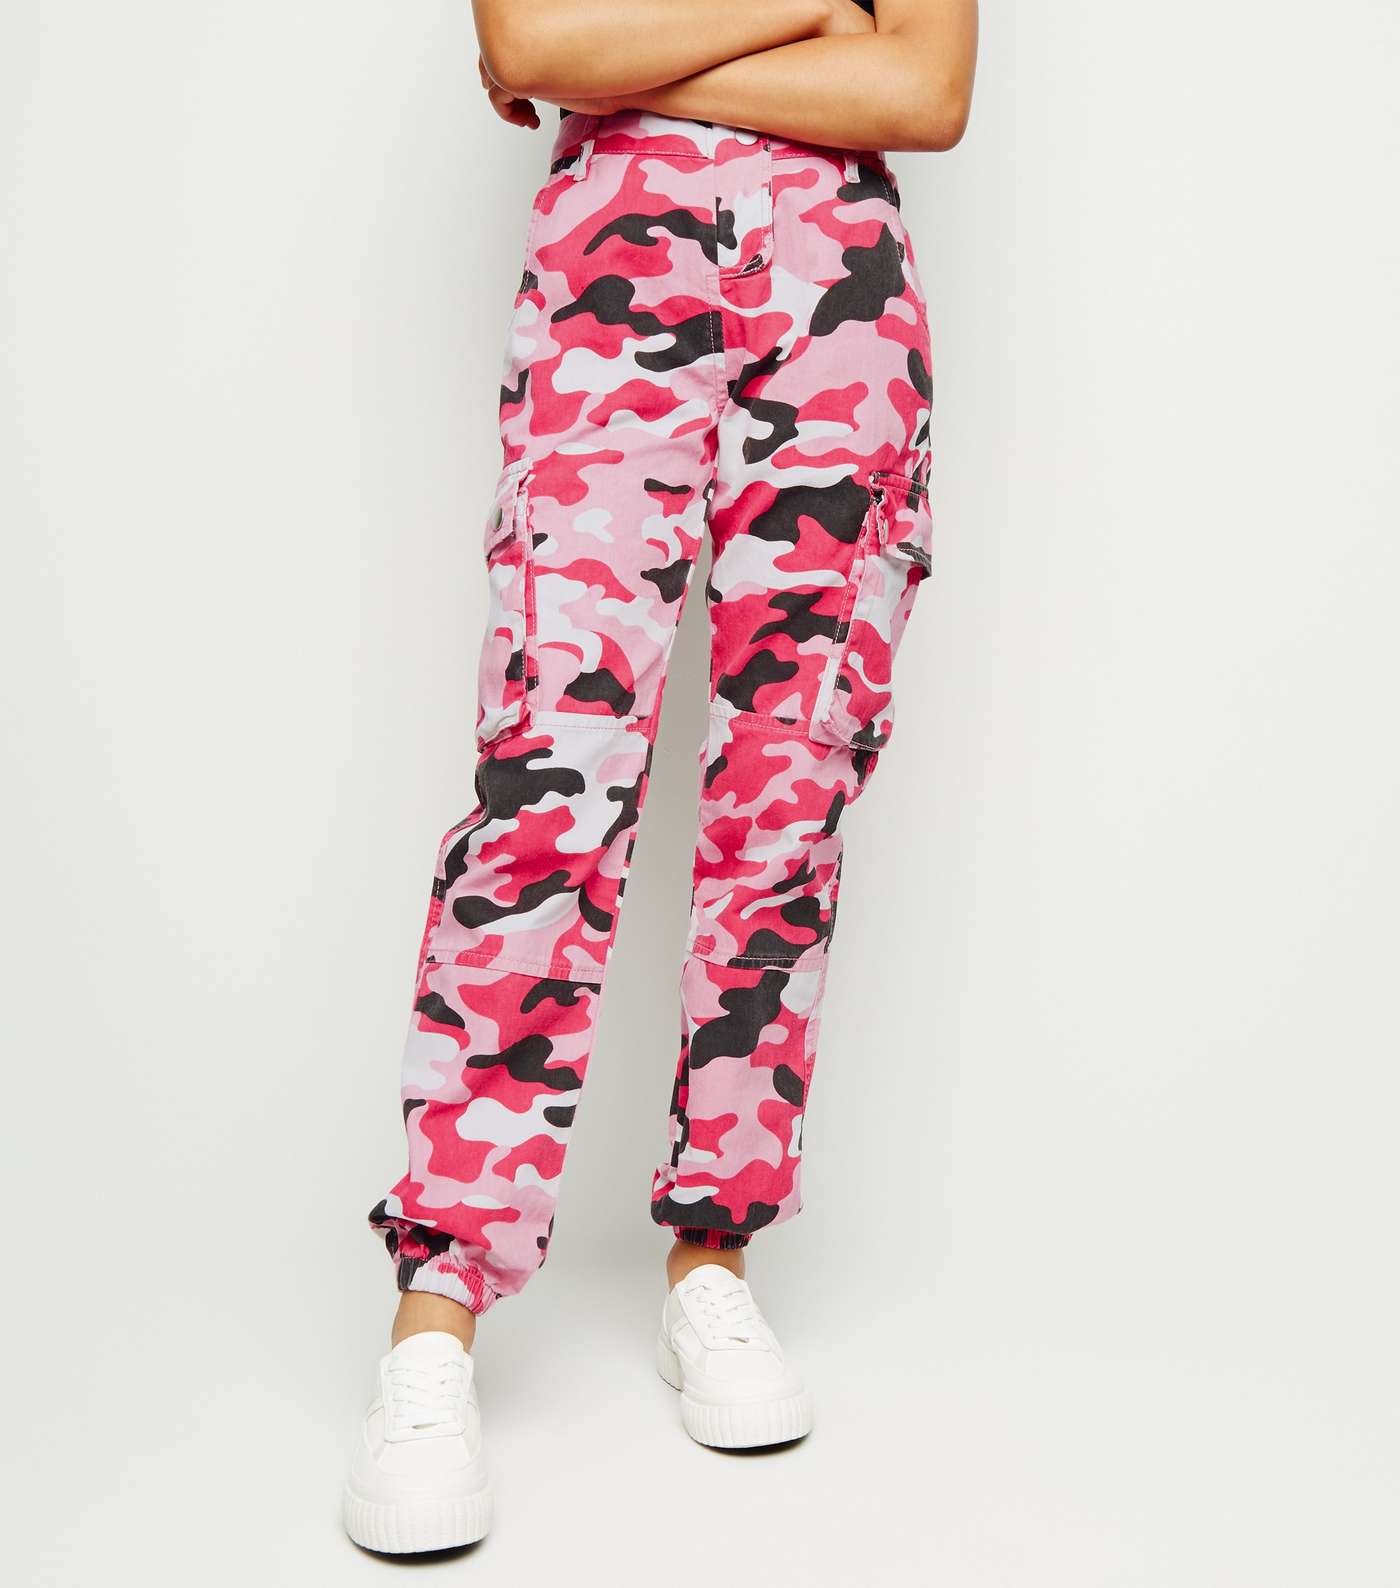 Girls Bright Pink Camo Utility Trousers Image 2